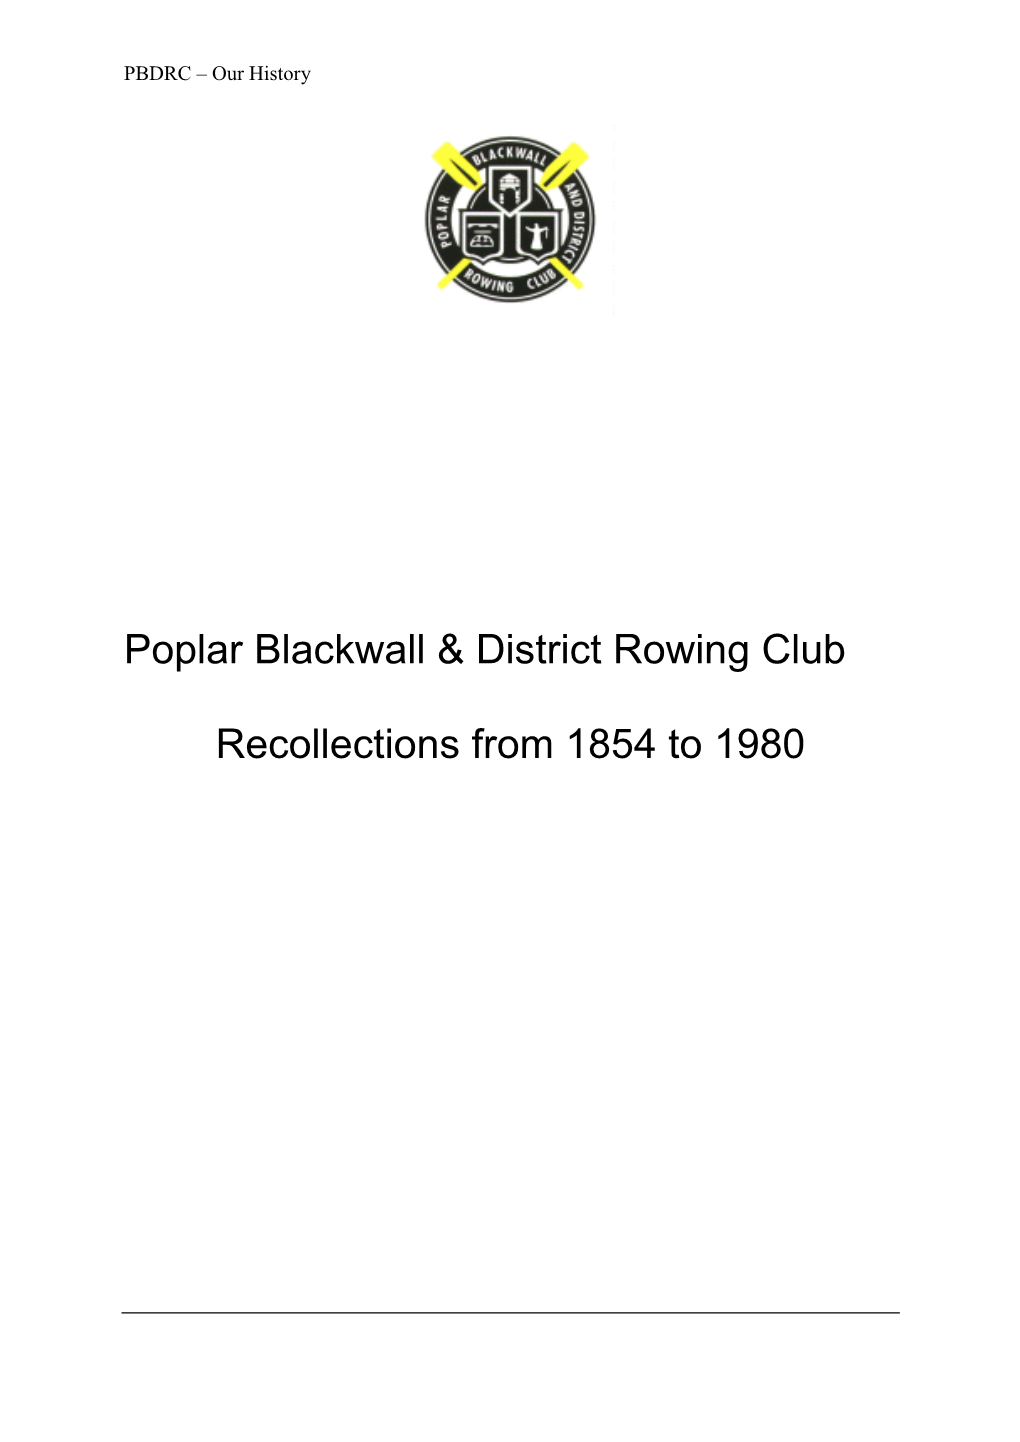 Poplar Blackwall & District Rowing Club Recollections from 1854 to 1980